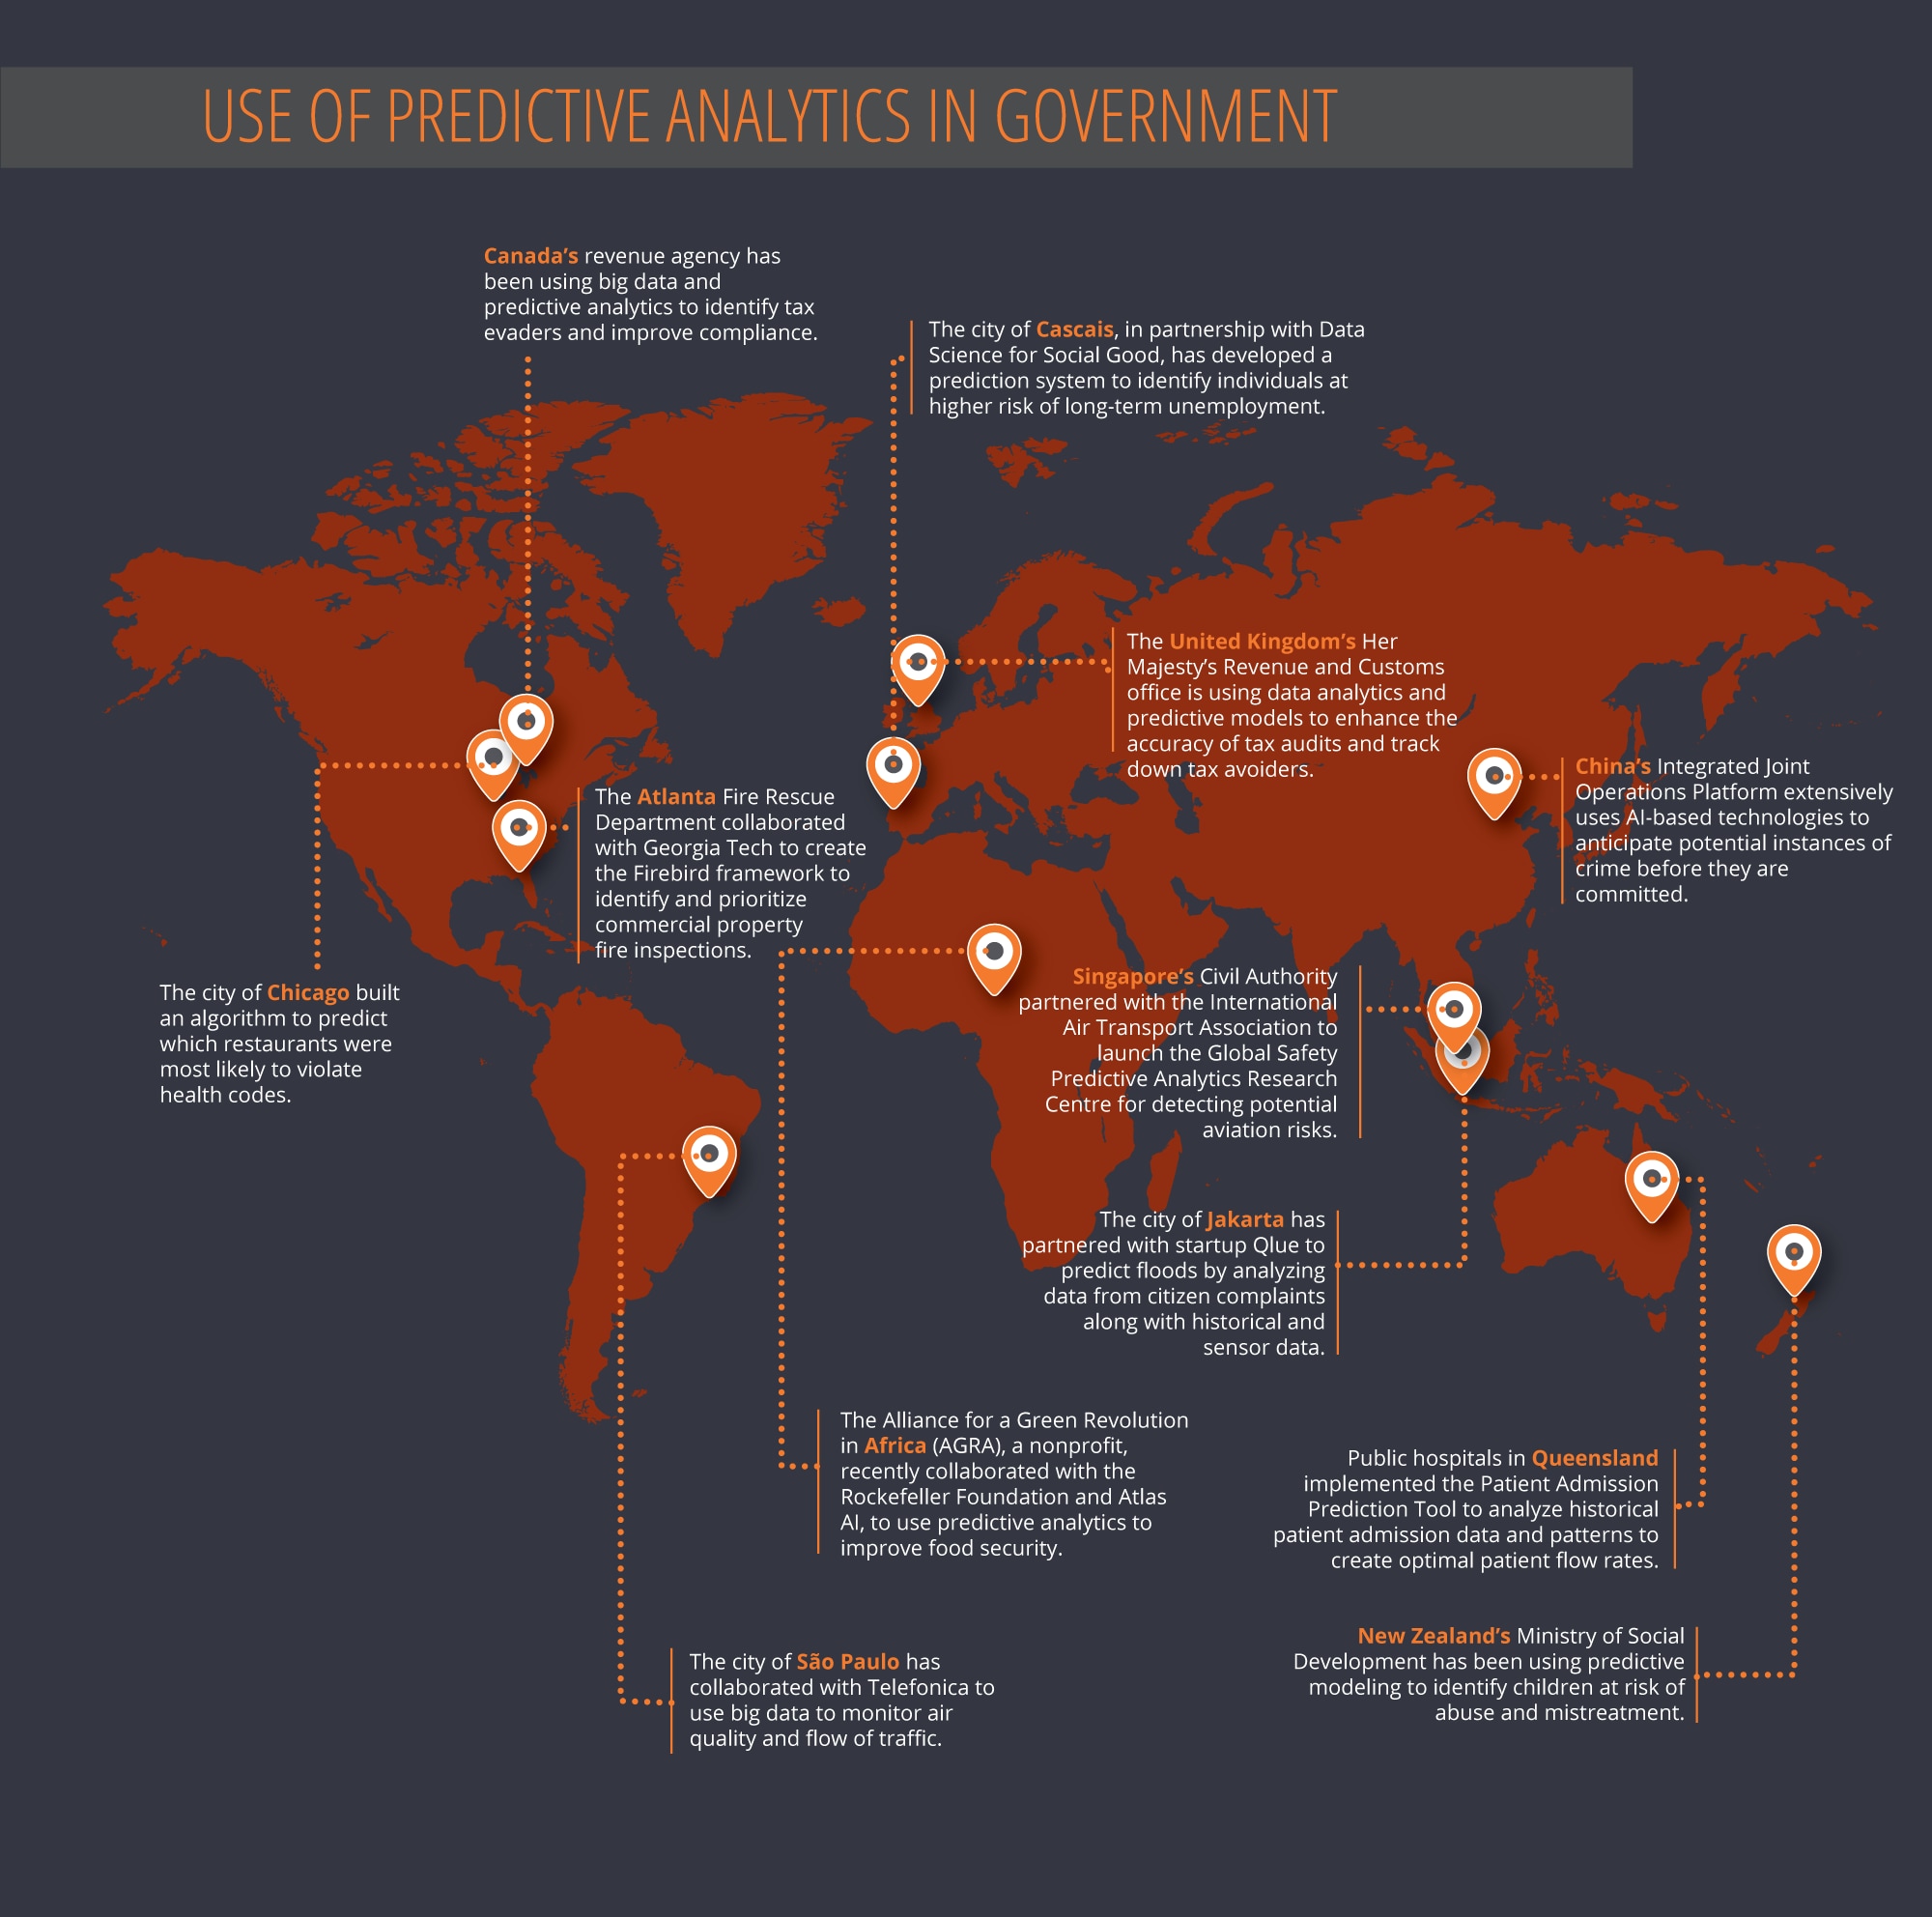 Use of predictive analytics in governments